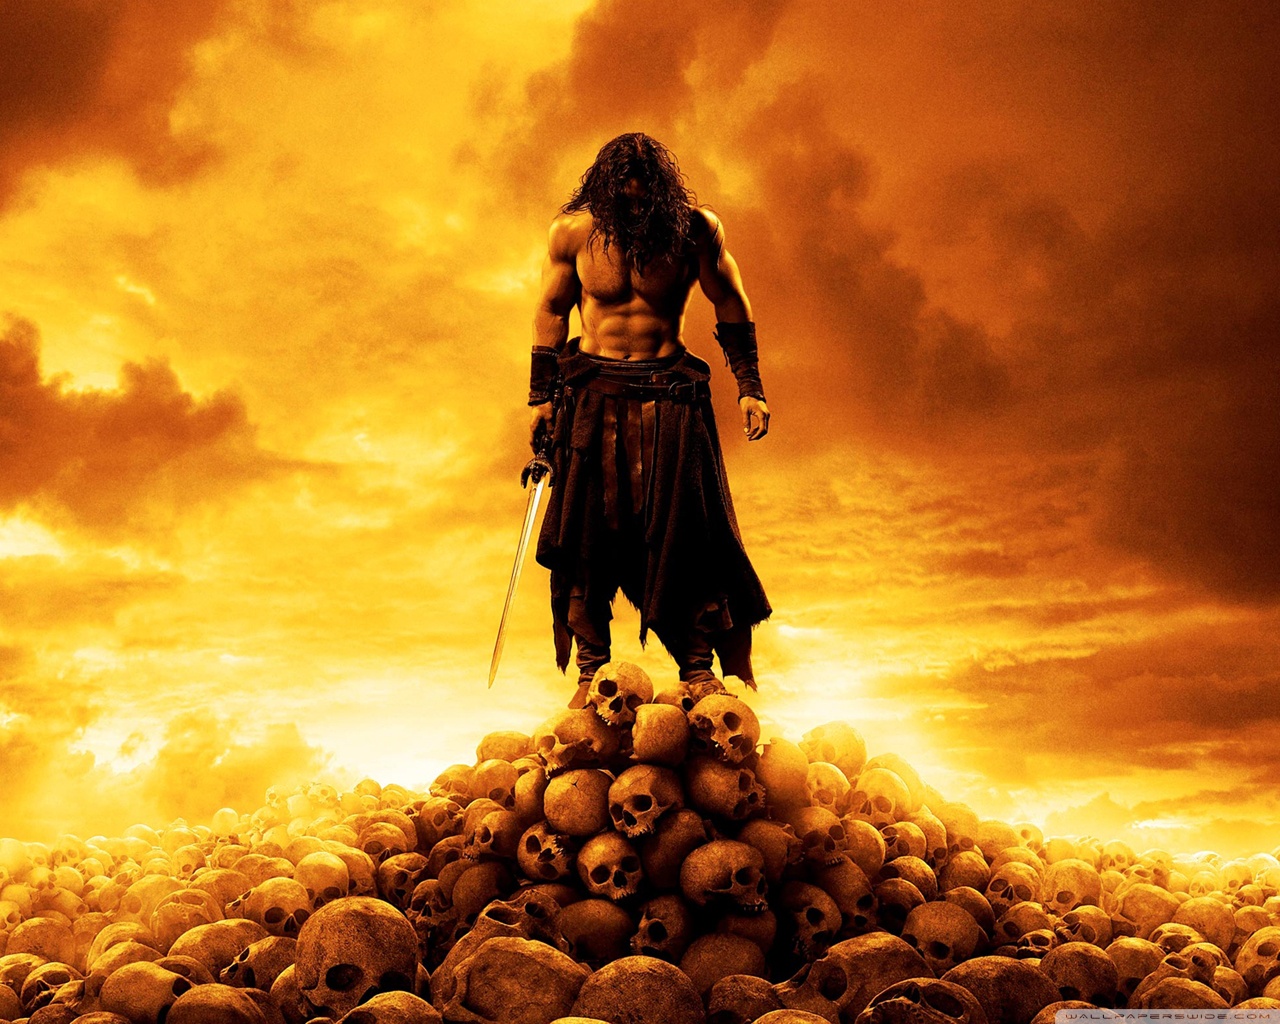 Amazing Conan The Barbarian (2011) Pictures & Backgrounds